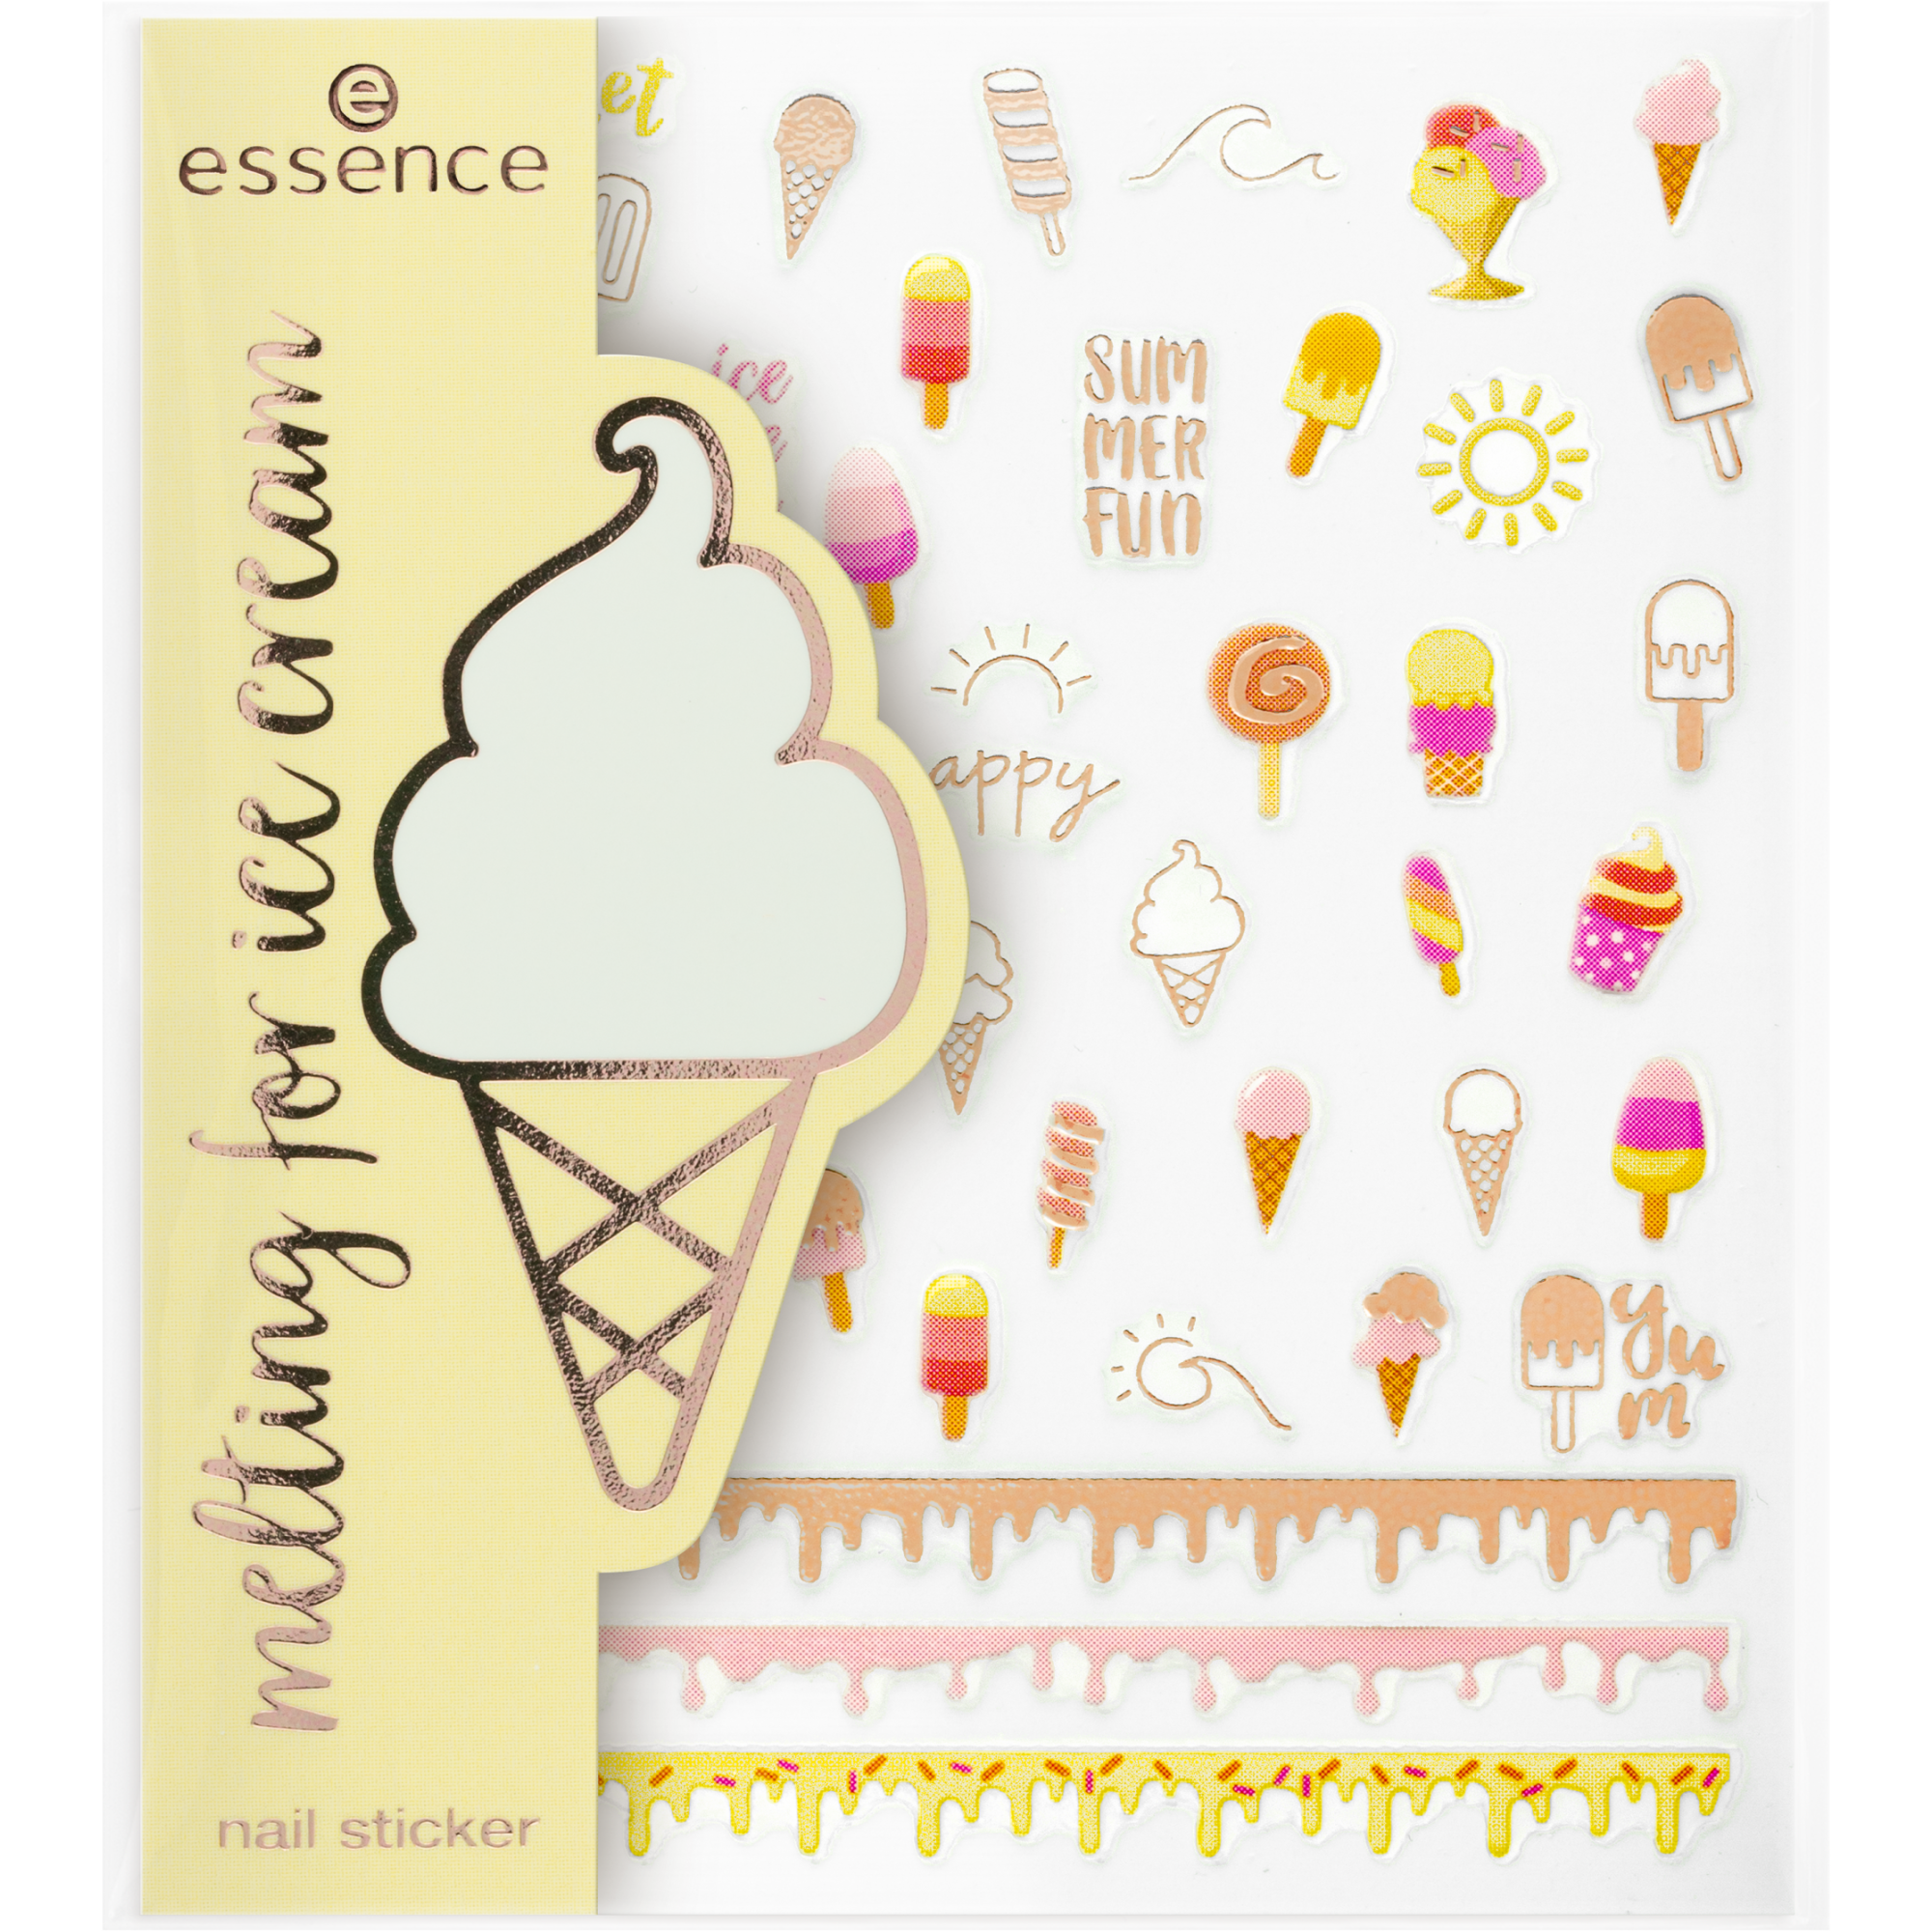 melting for ice cream nail stickerτού